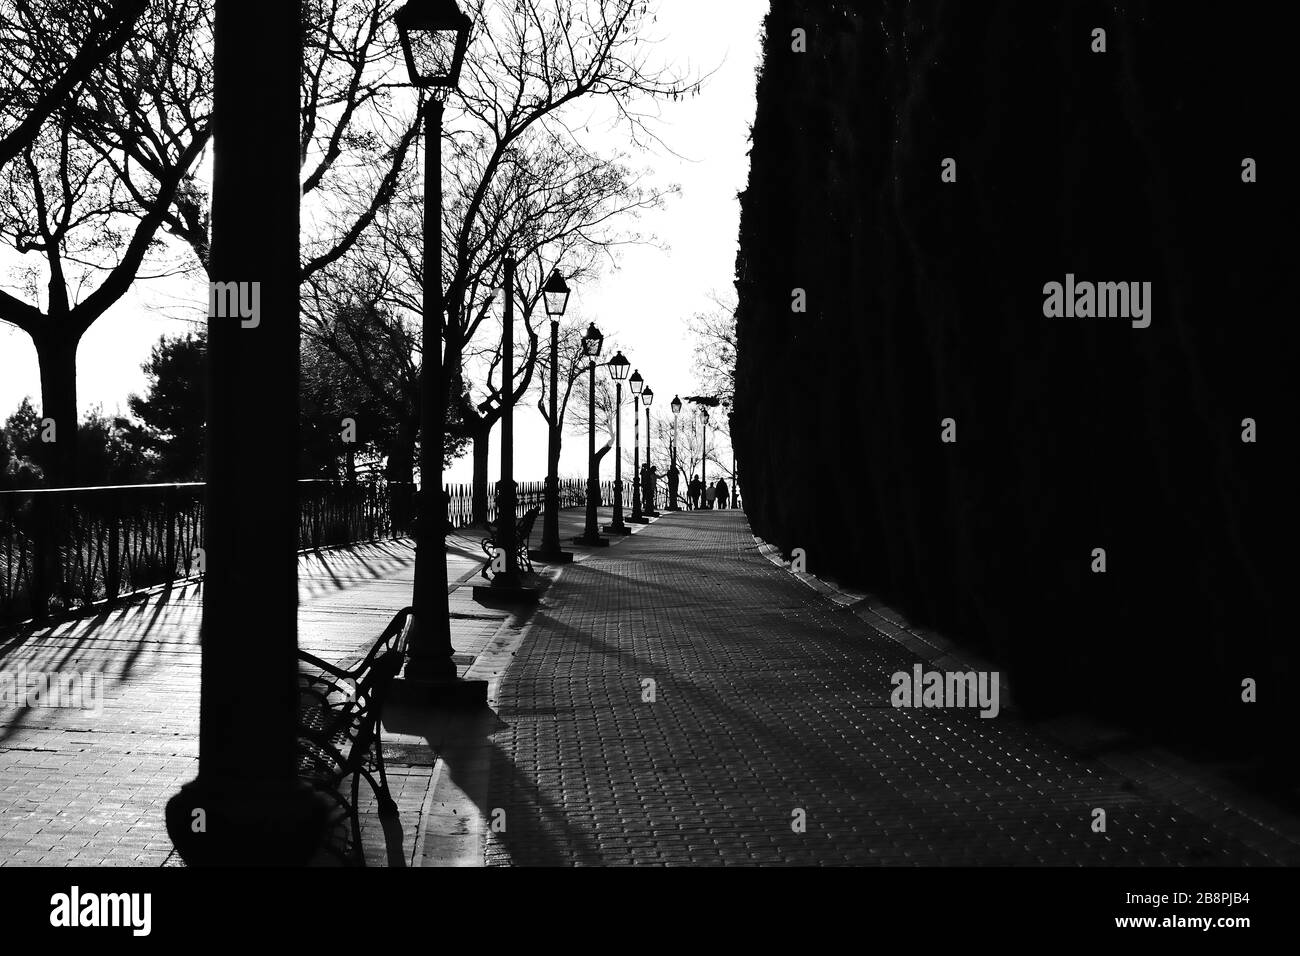 Walk in the park in black and white among trees and lampposts at sunset Stock Photo